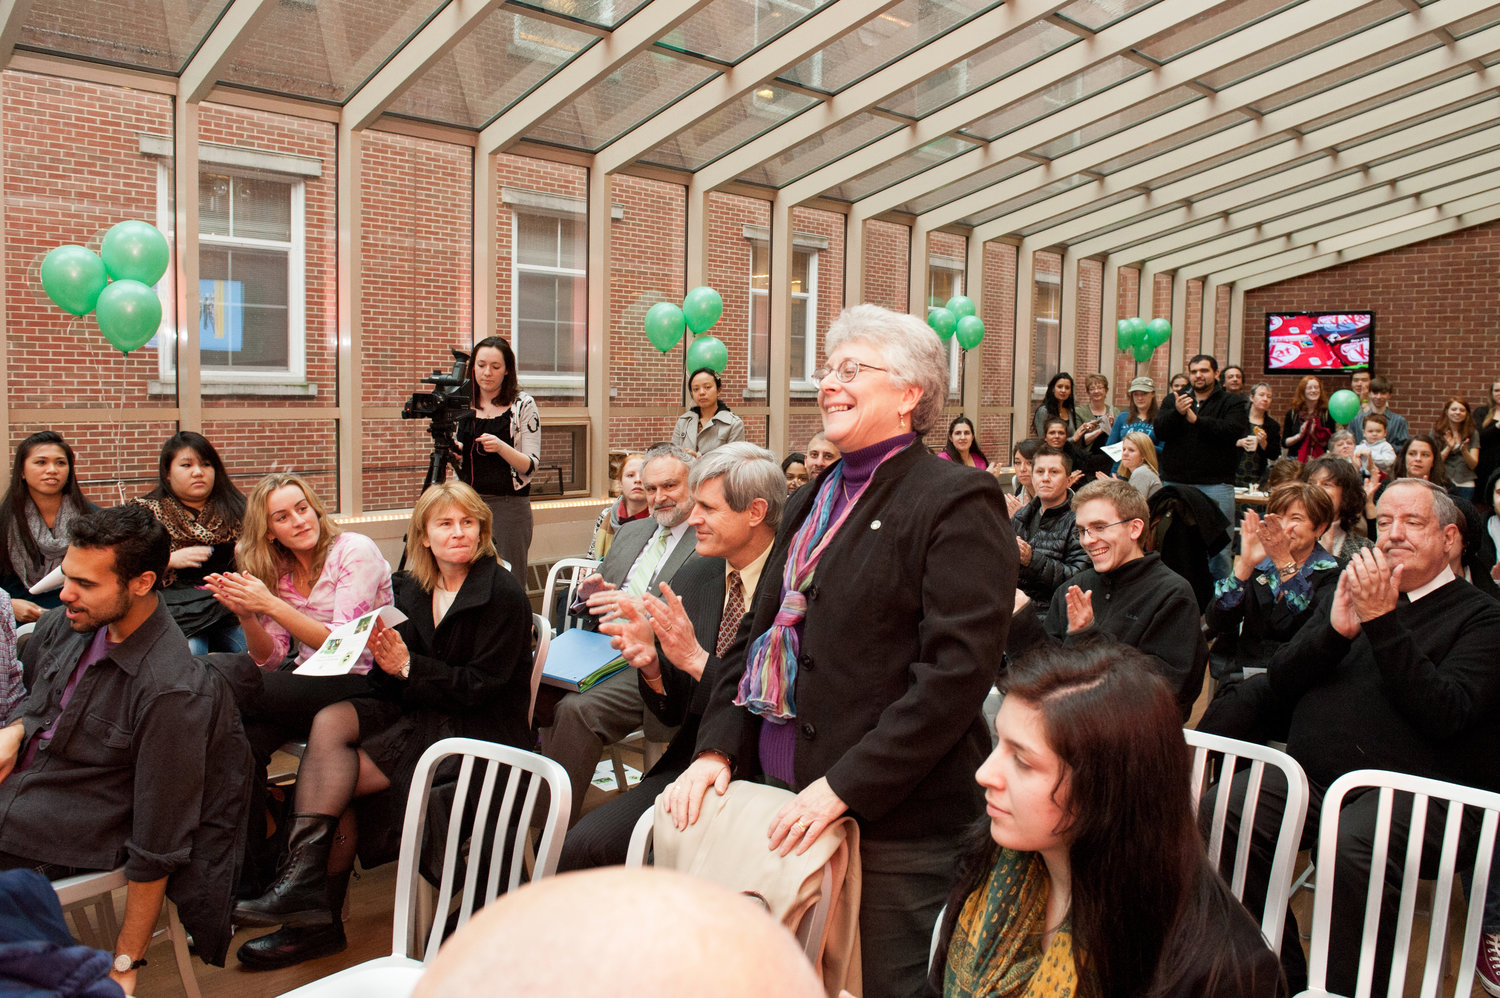 For her entire life, Lois Harr has called the Bronx home. And for more than 20 years, her second home was Manhattan College, where she worked as the director of campus ministry and social action before retiring at the end of this past spring semester.